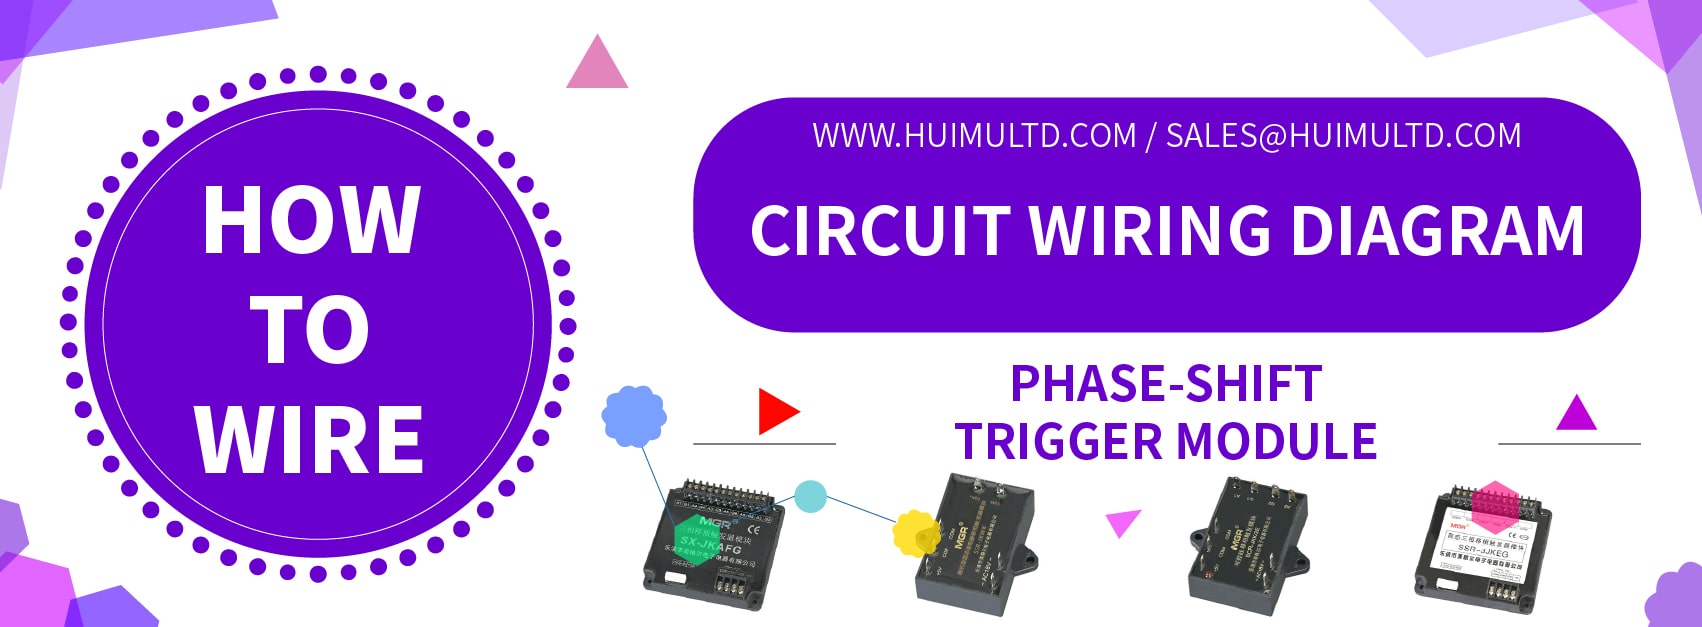 How to wire the phase-shift trigger module? banner